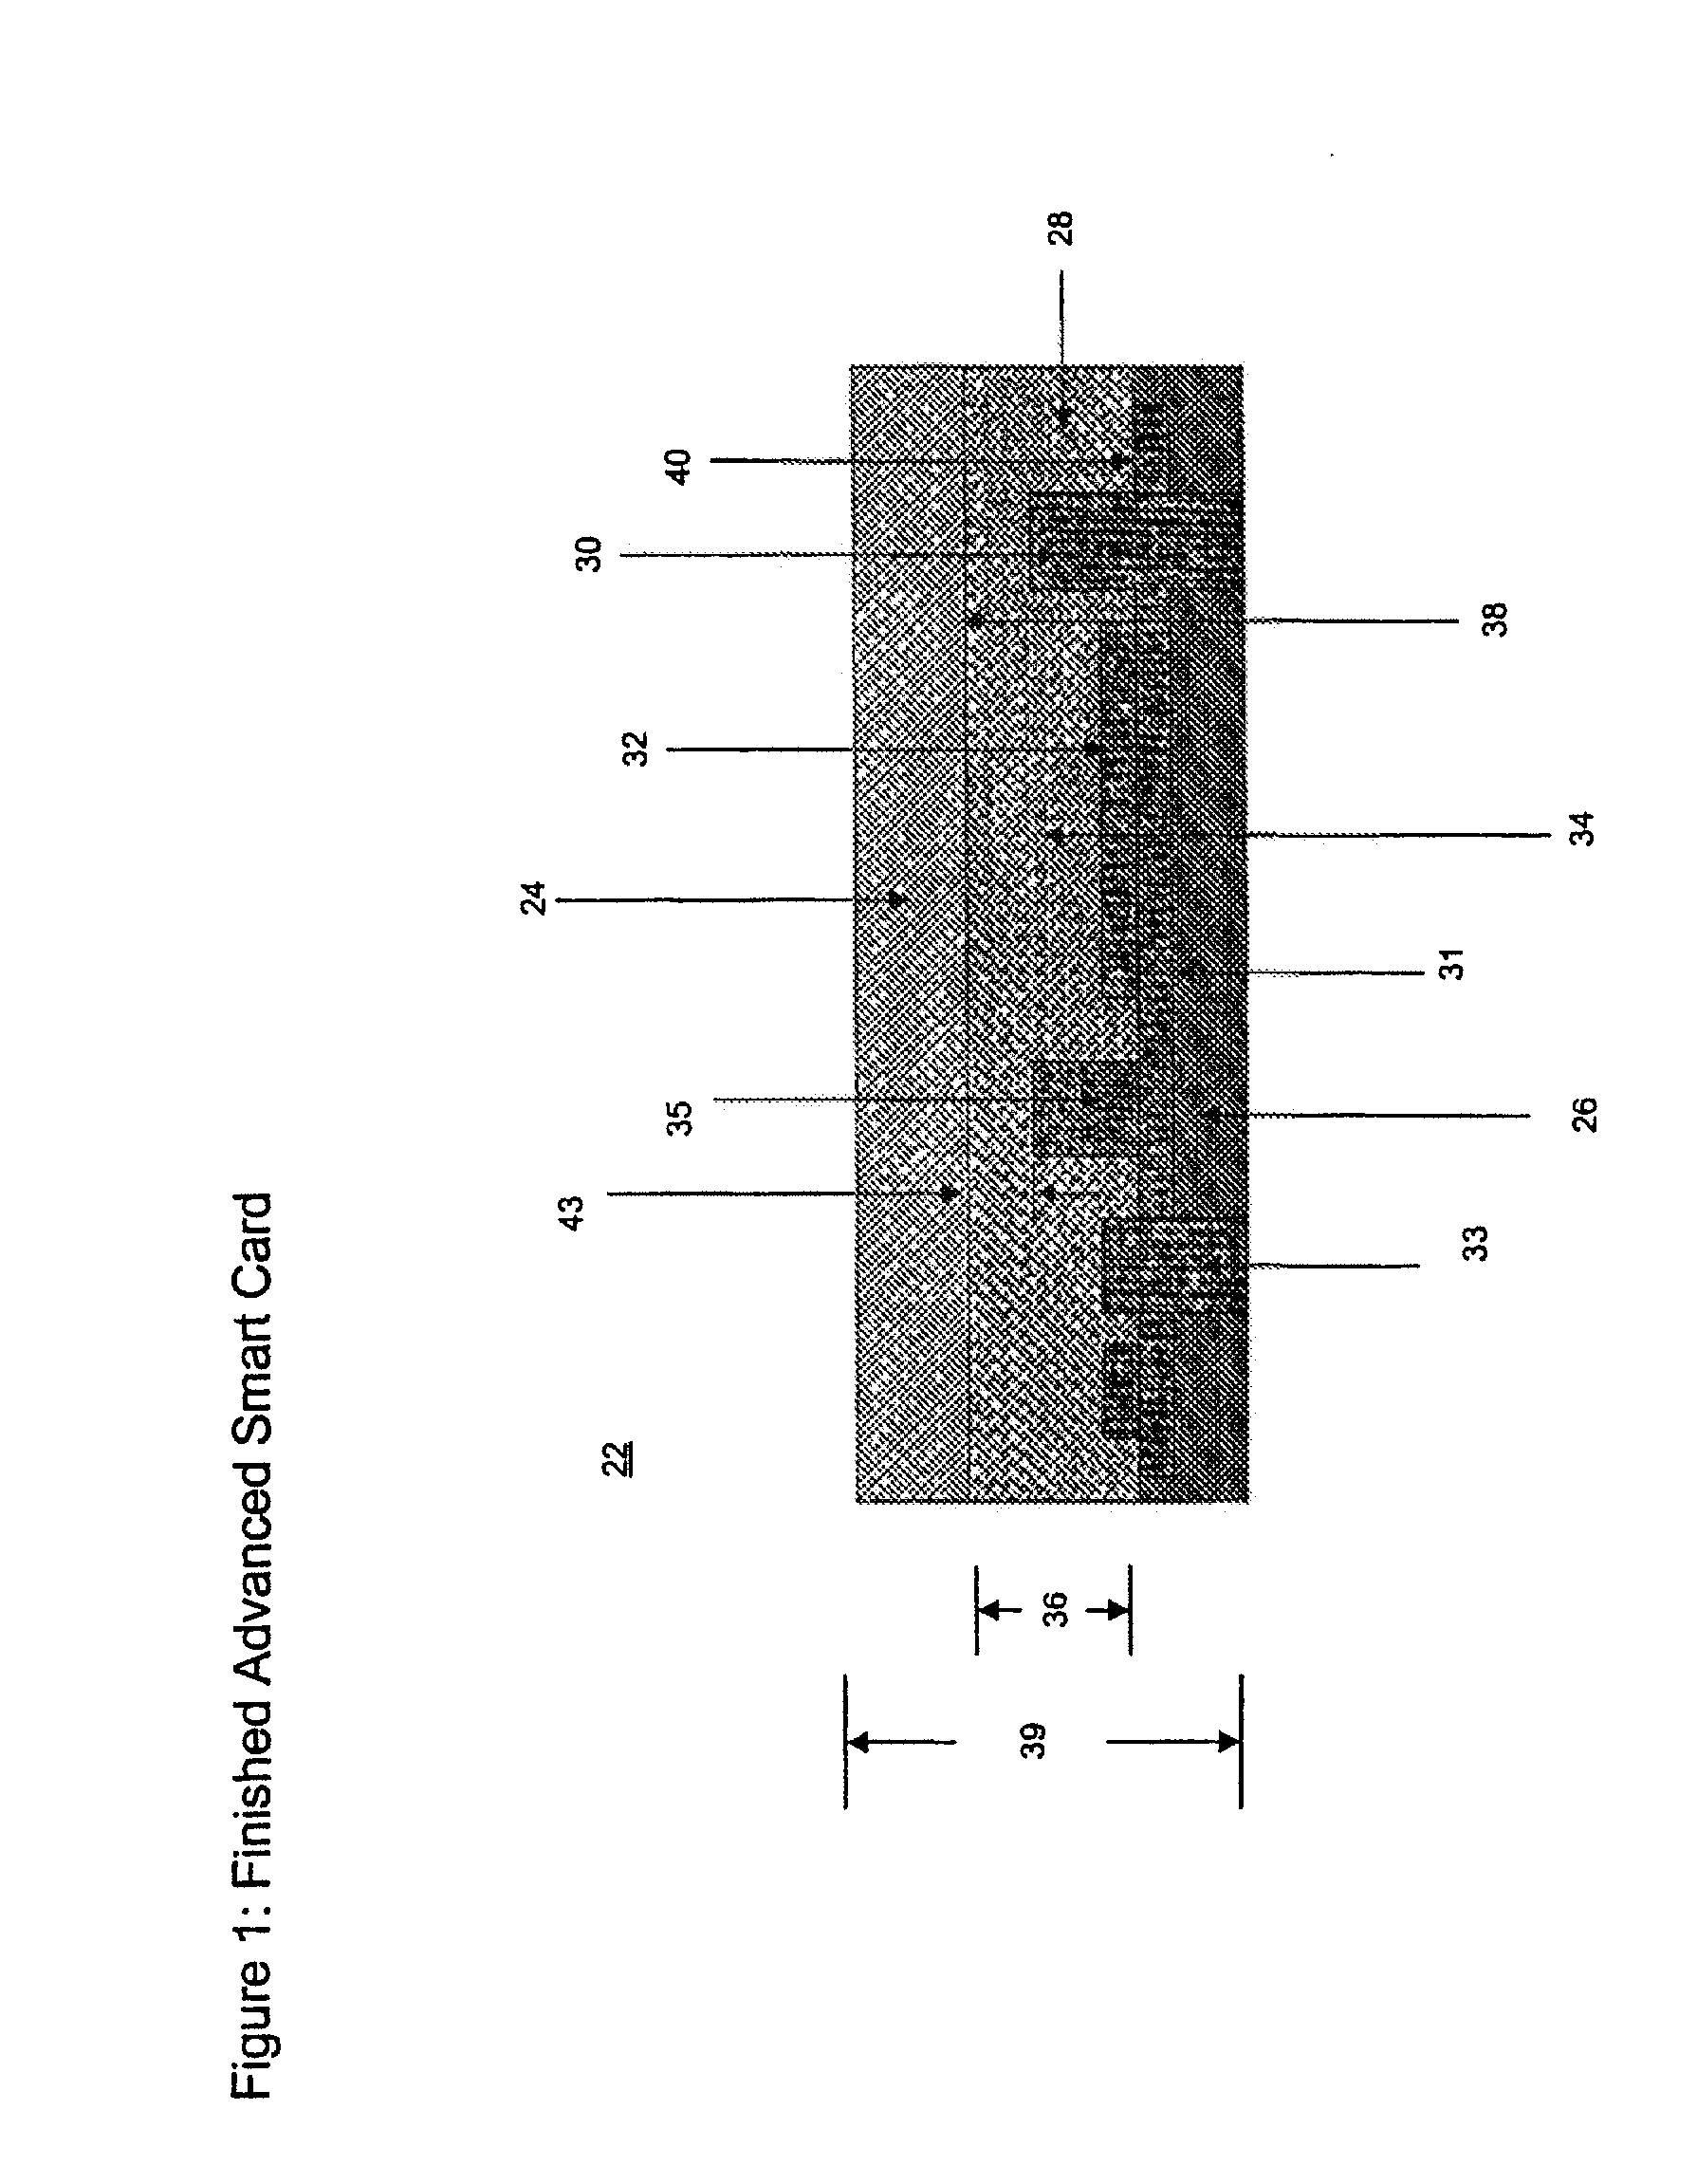 Method for making advanced smart cards with integrated electronics using isotropic thermoset adhesive materials with high quality exterior surfaces